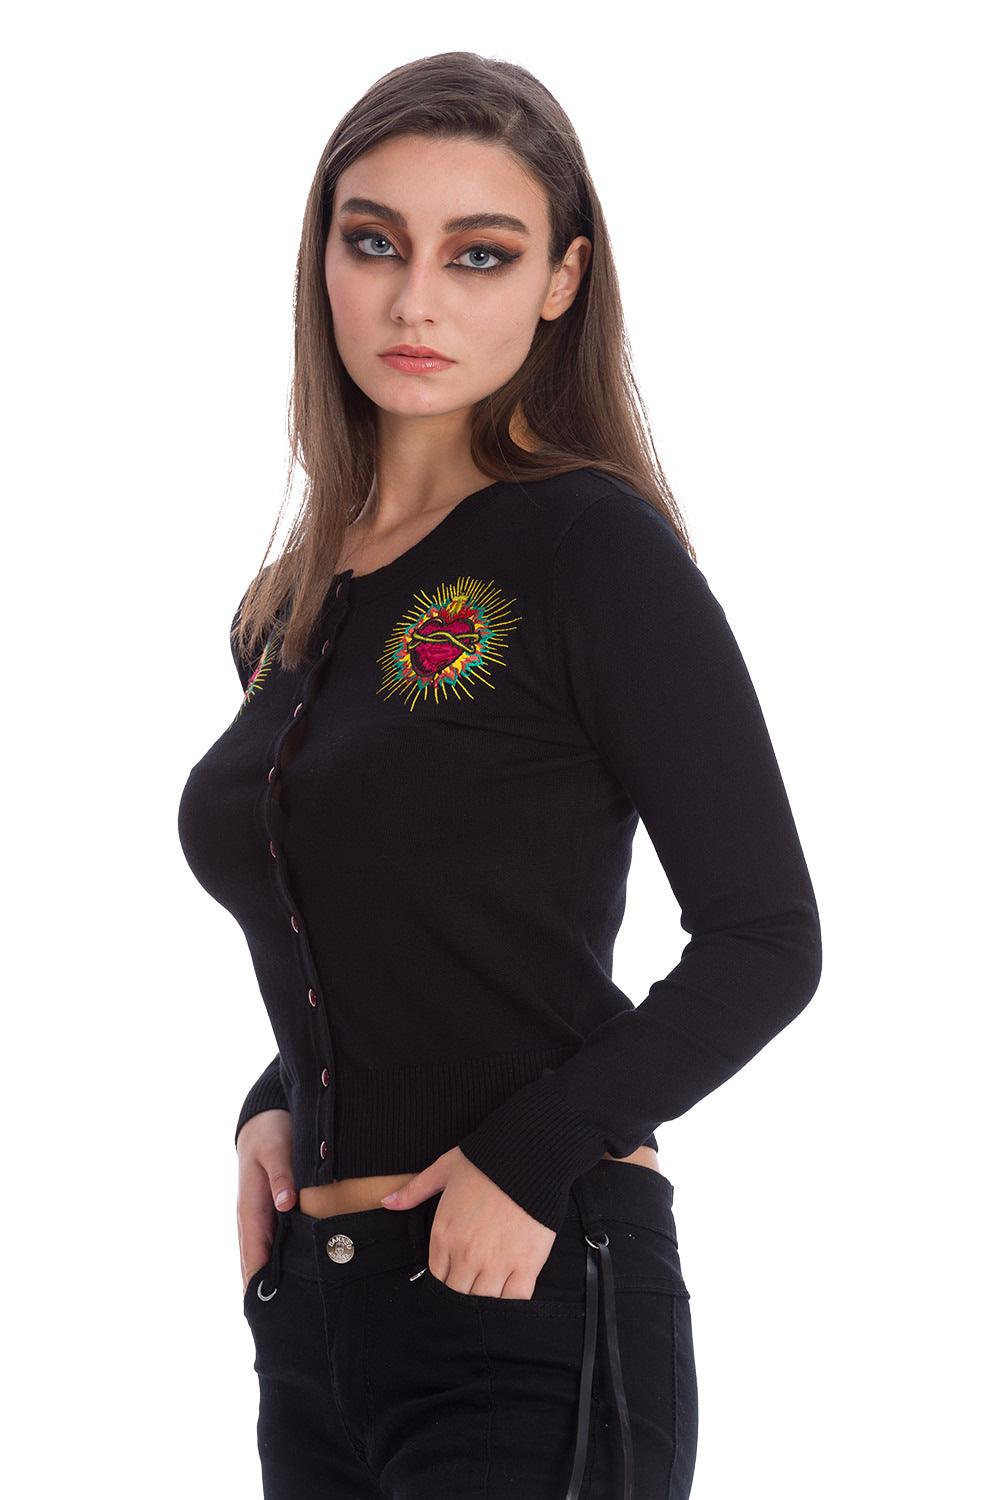 Model wearing a black cardigan with red buttons and heart shoulder motifs 